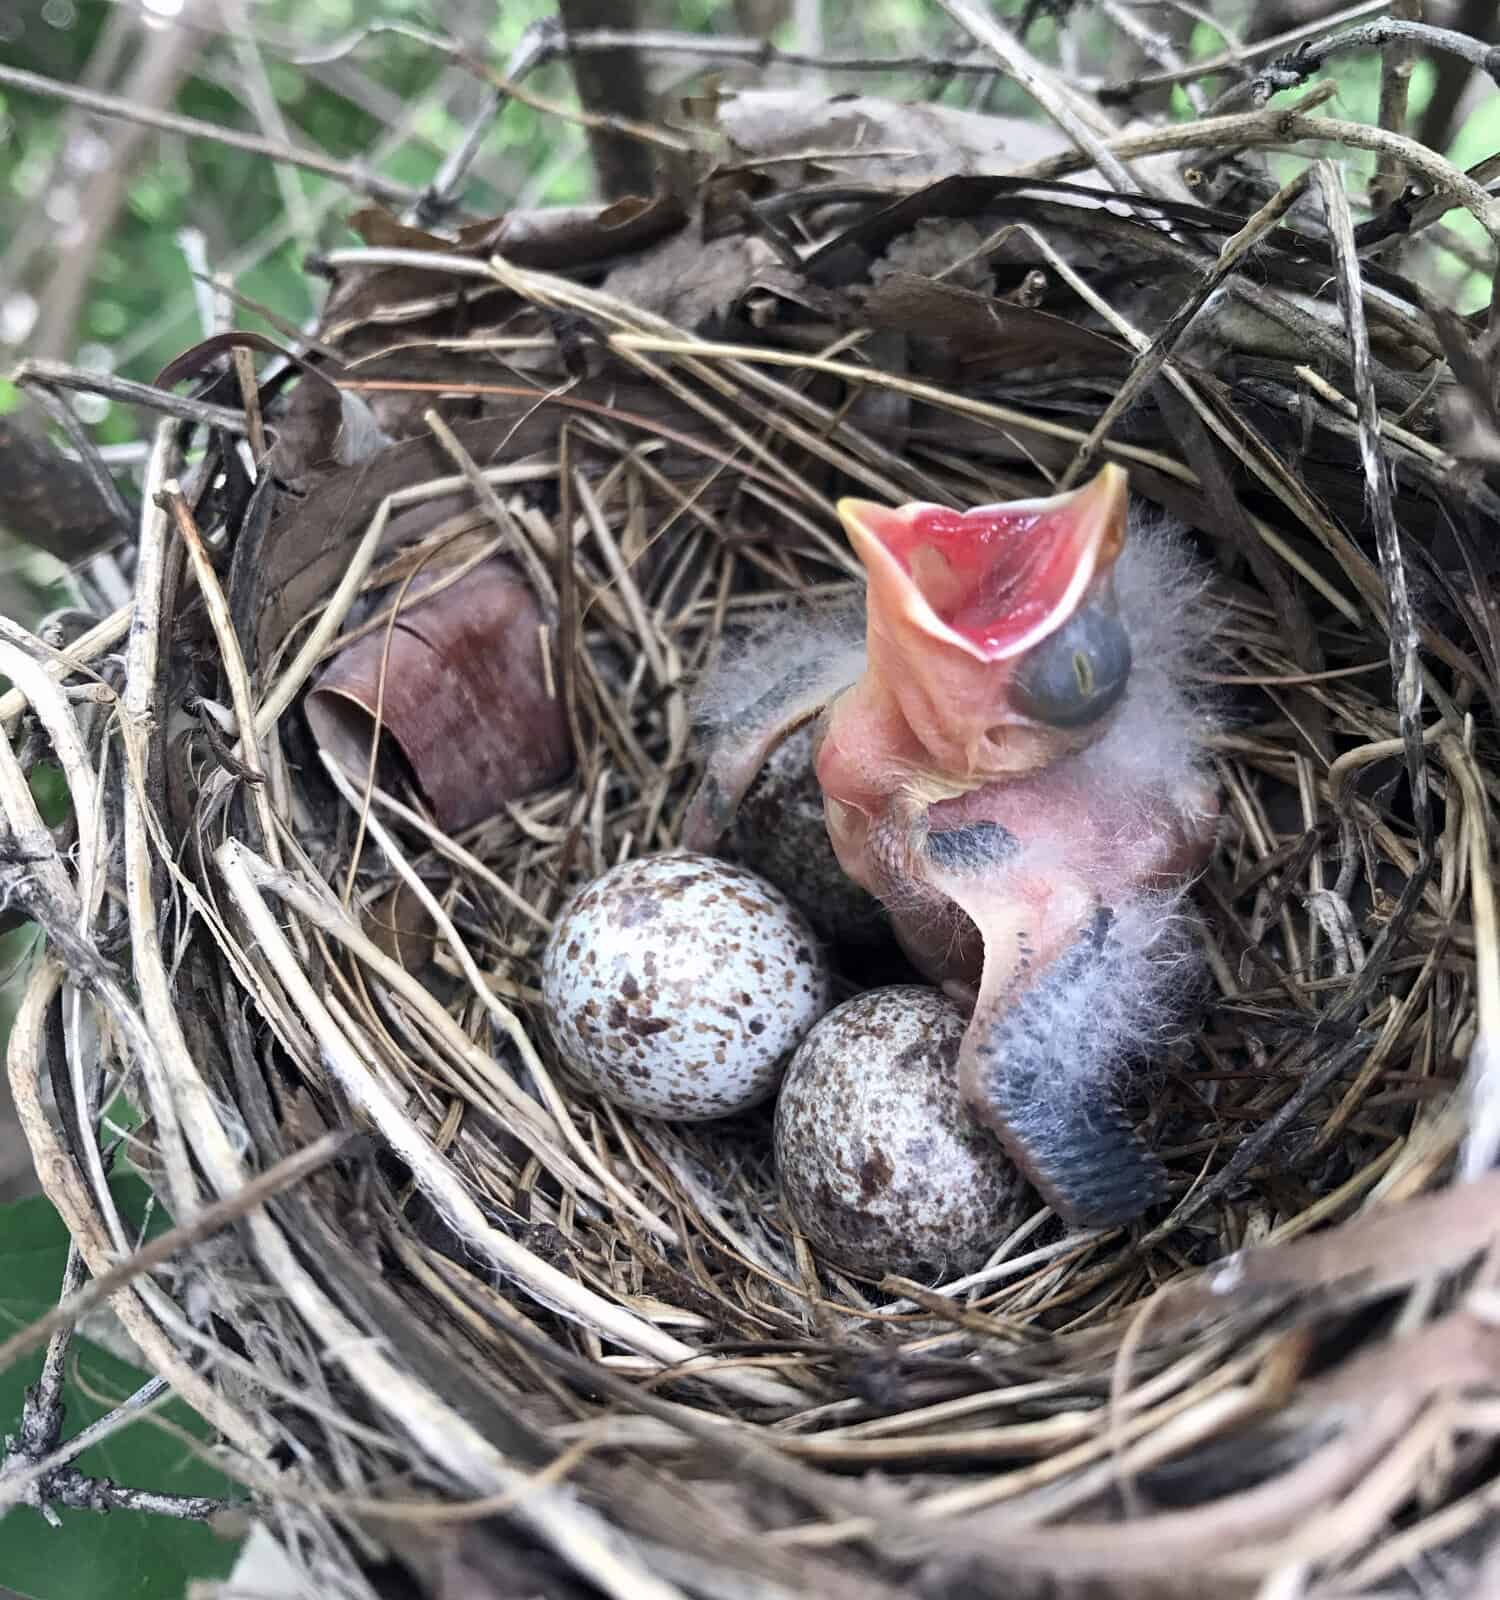 A newly hatched Northern Cardinal opens its mouth waiting for food, while in a nest with speckled eggs.